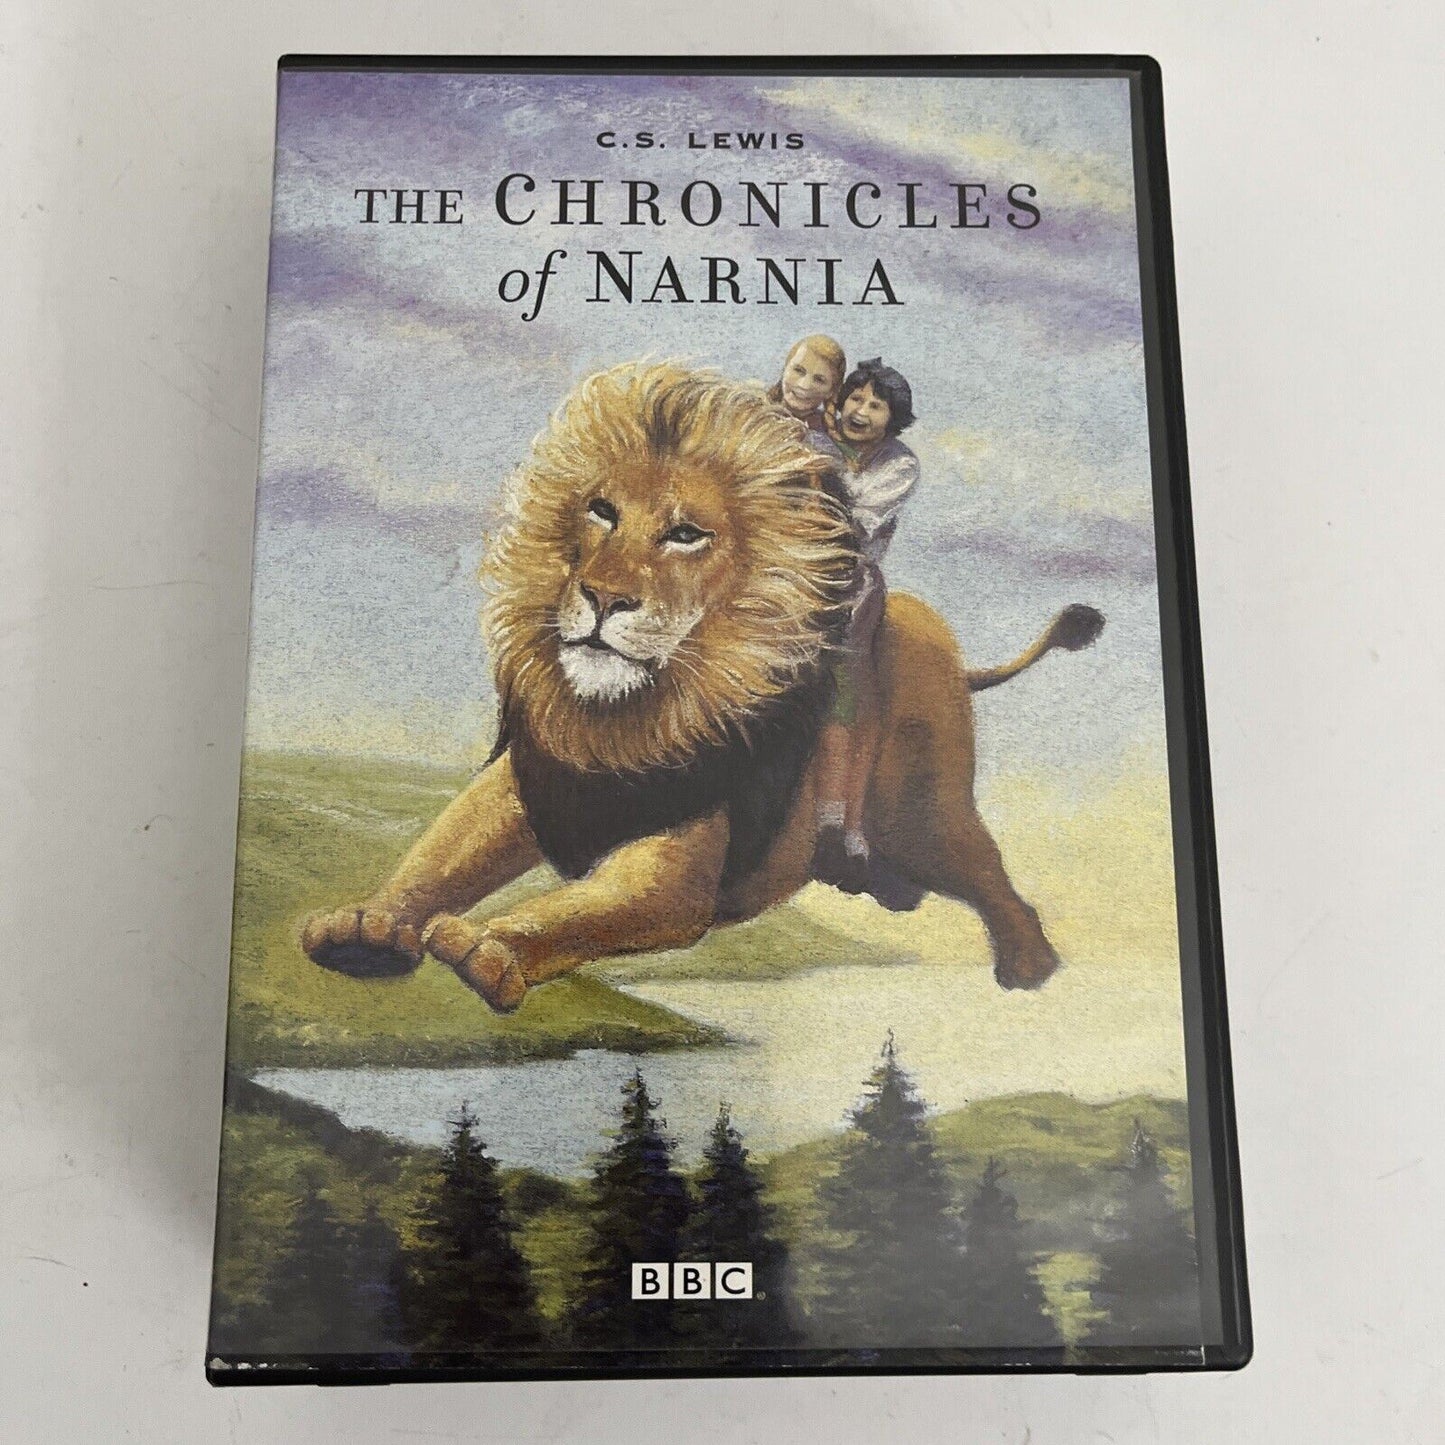 C.S. Lewis: The Chronicles Of Narnia (DVD, 1990, 3-Disc) BBC All Regions